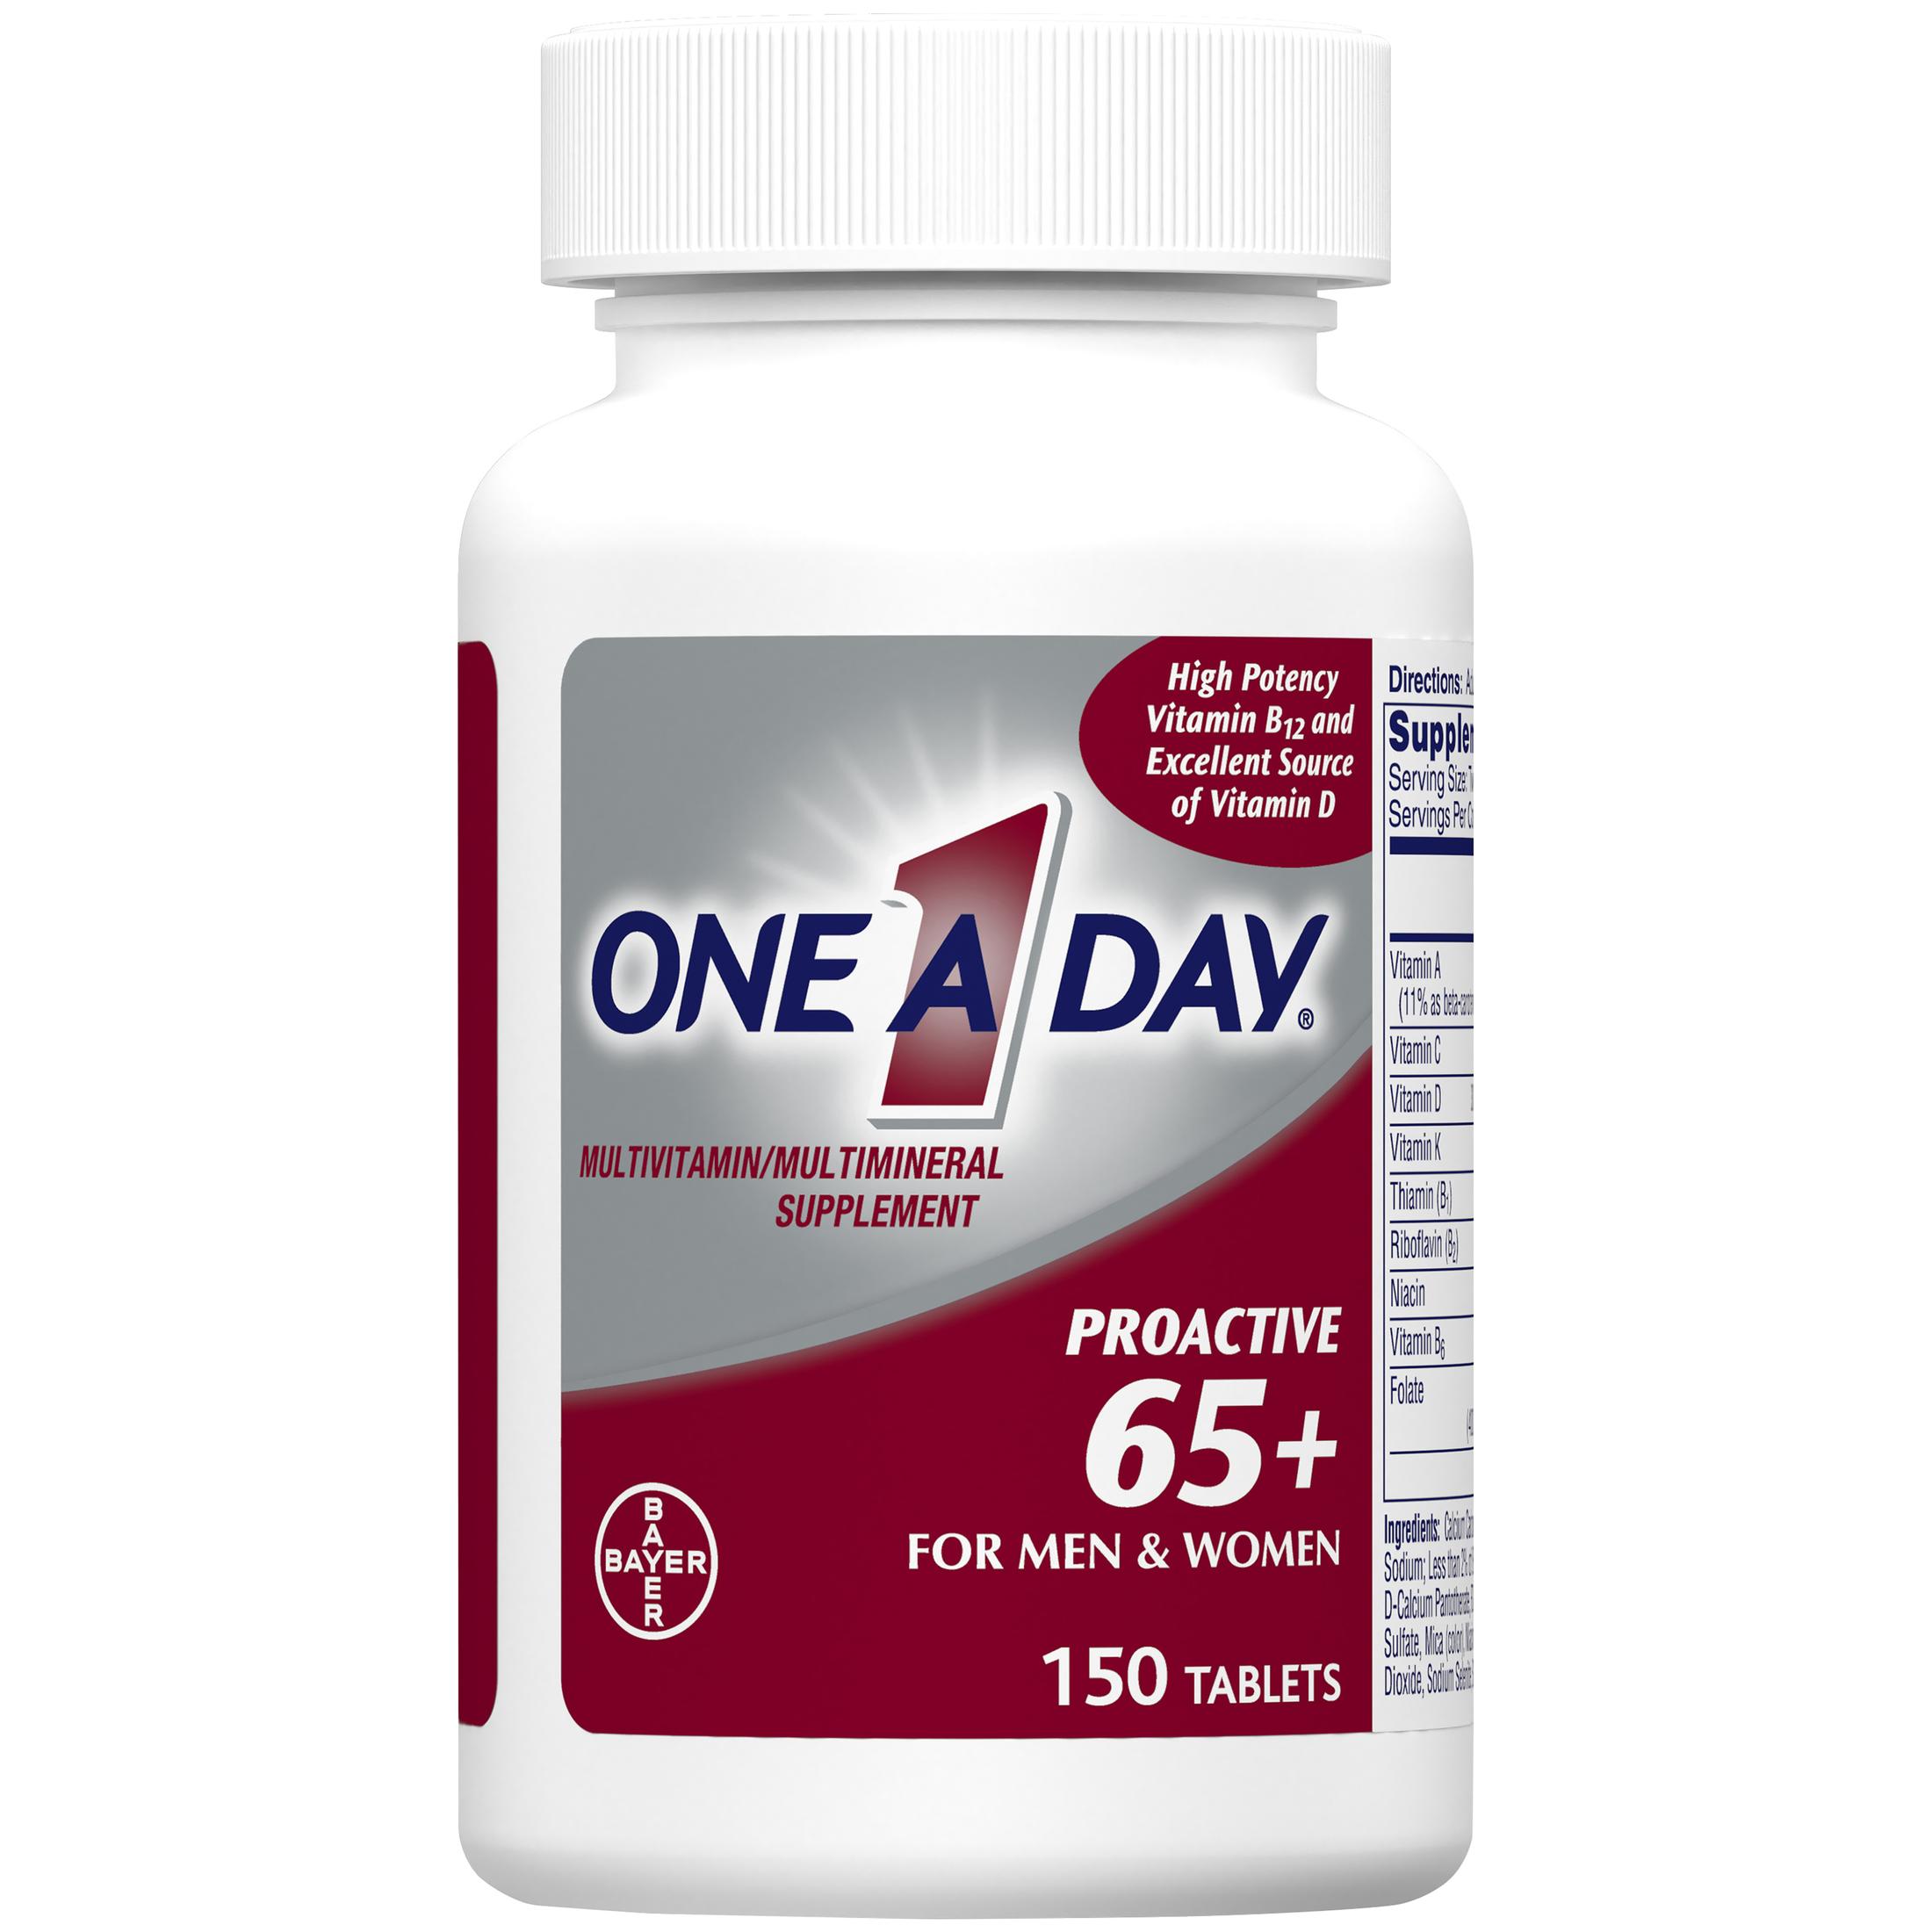 One A Day Proactive 65+ Multivitamin Tablets for Men and Women, 150ct - image 3 of 9